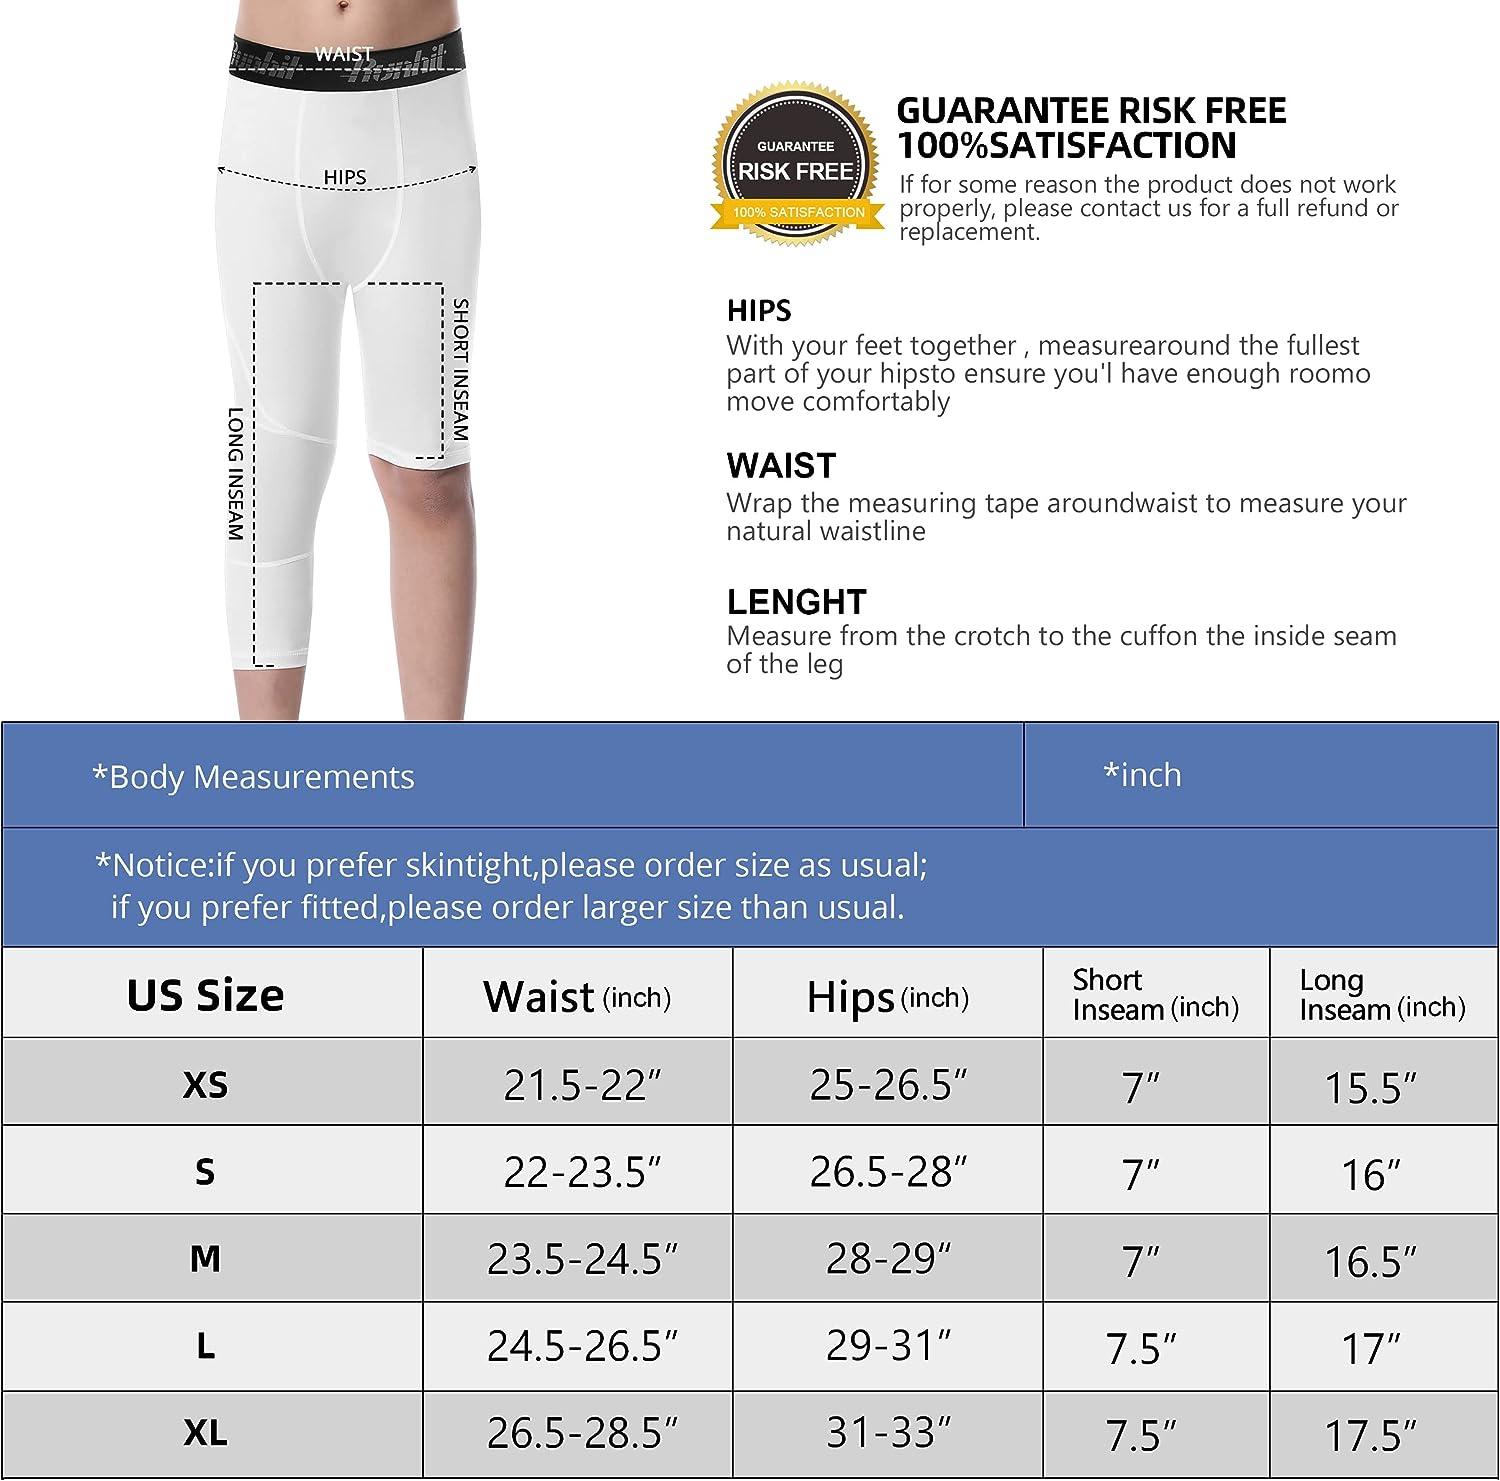 Cheap Men Base Layer Exercise Trousers Compression Running Tight Sport  Cropped One Leg Leggings Basketball Football Yoga Fitness Pants